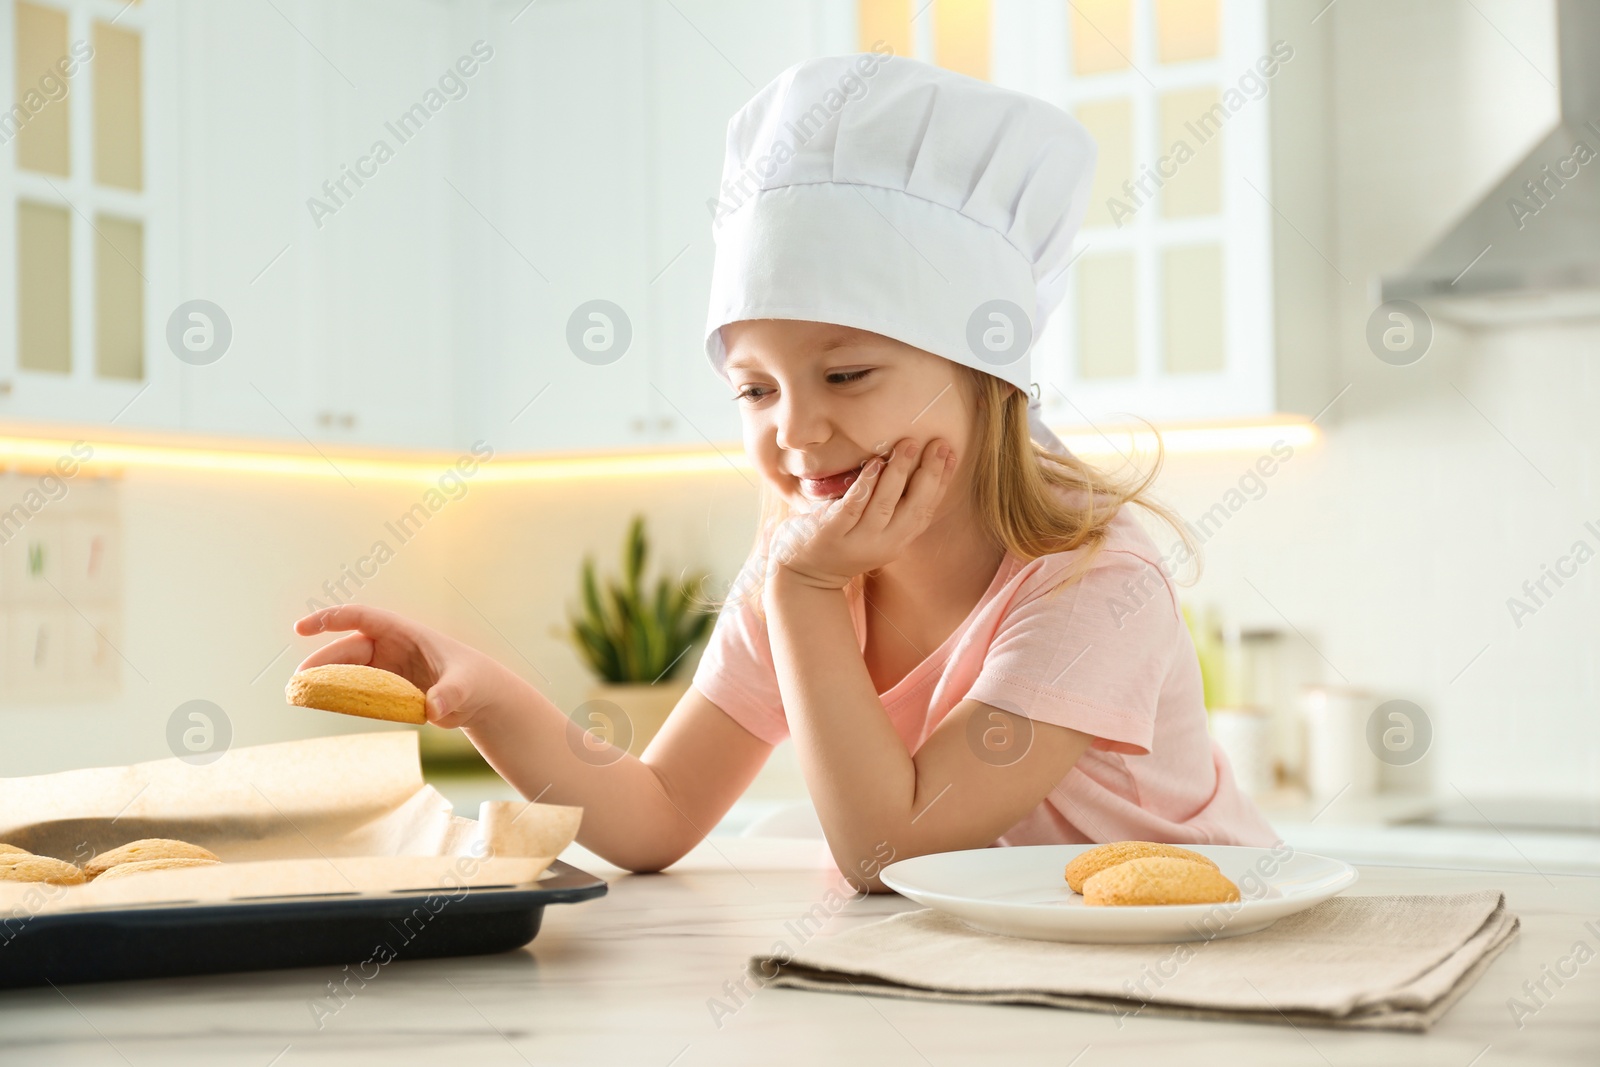 Photo of Little girl wearing chef hat baking cookies in kitchen